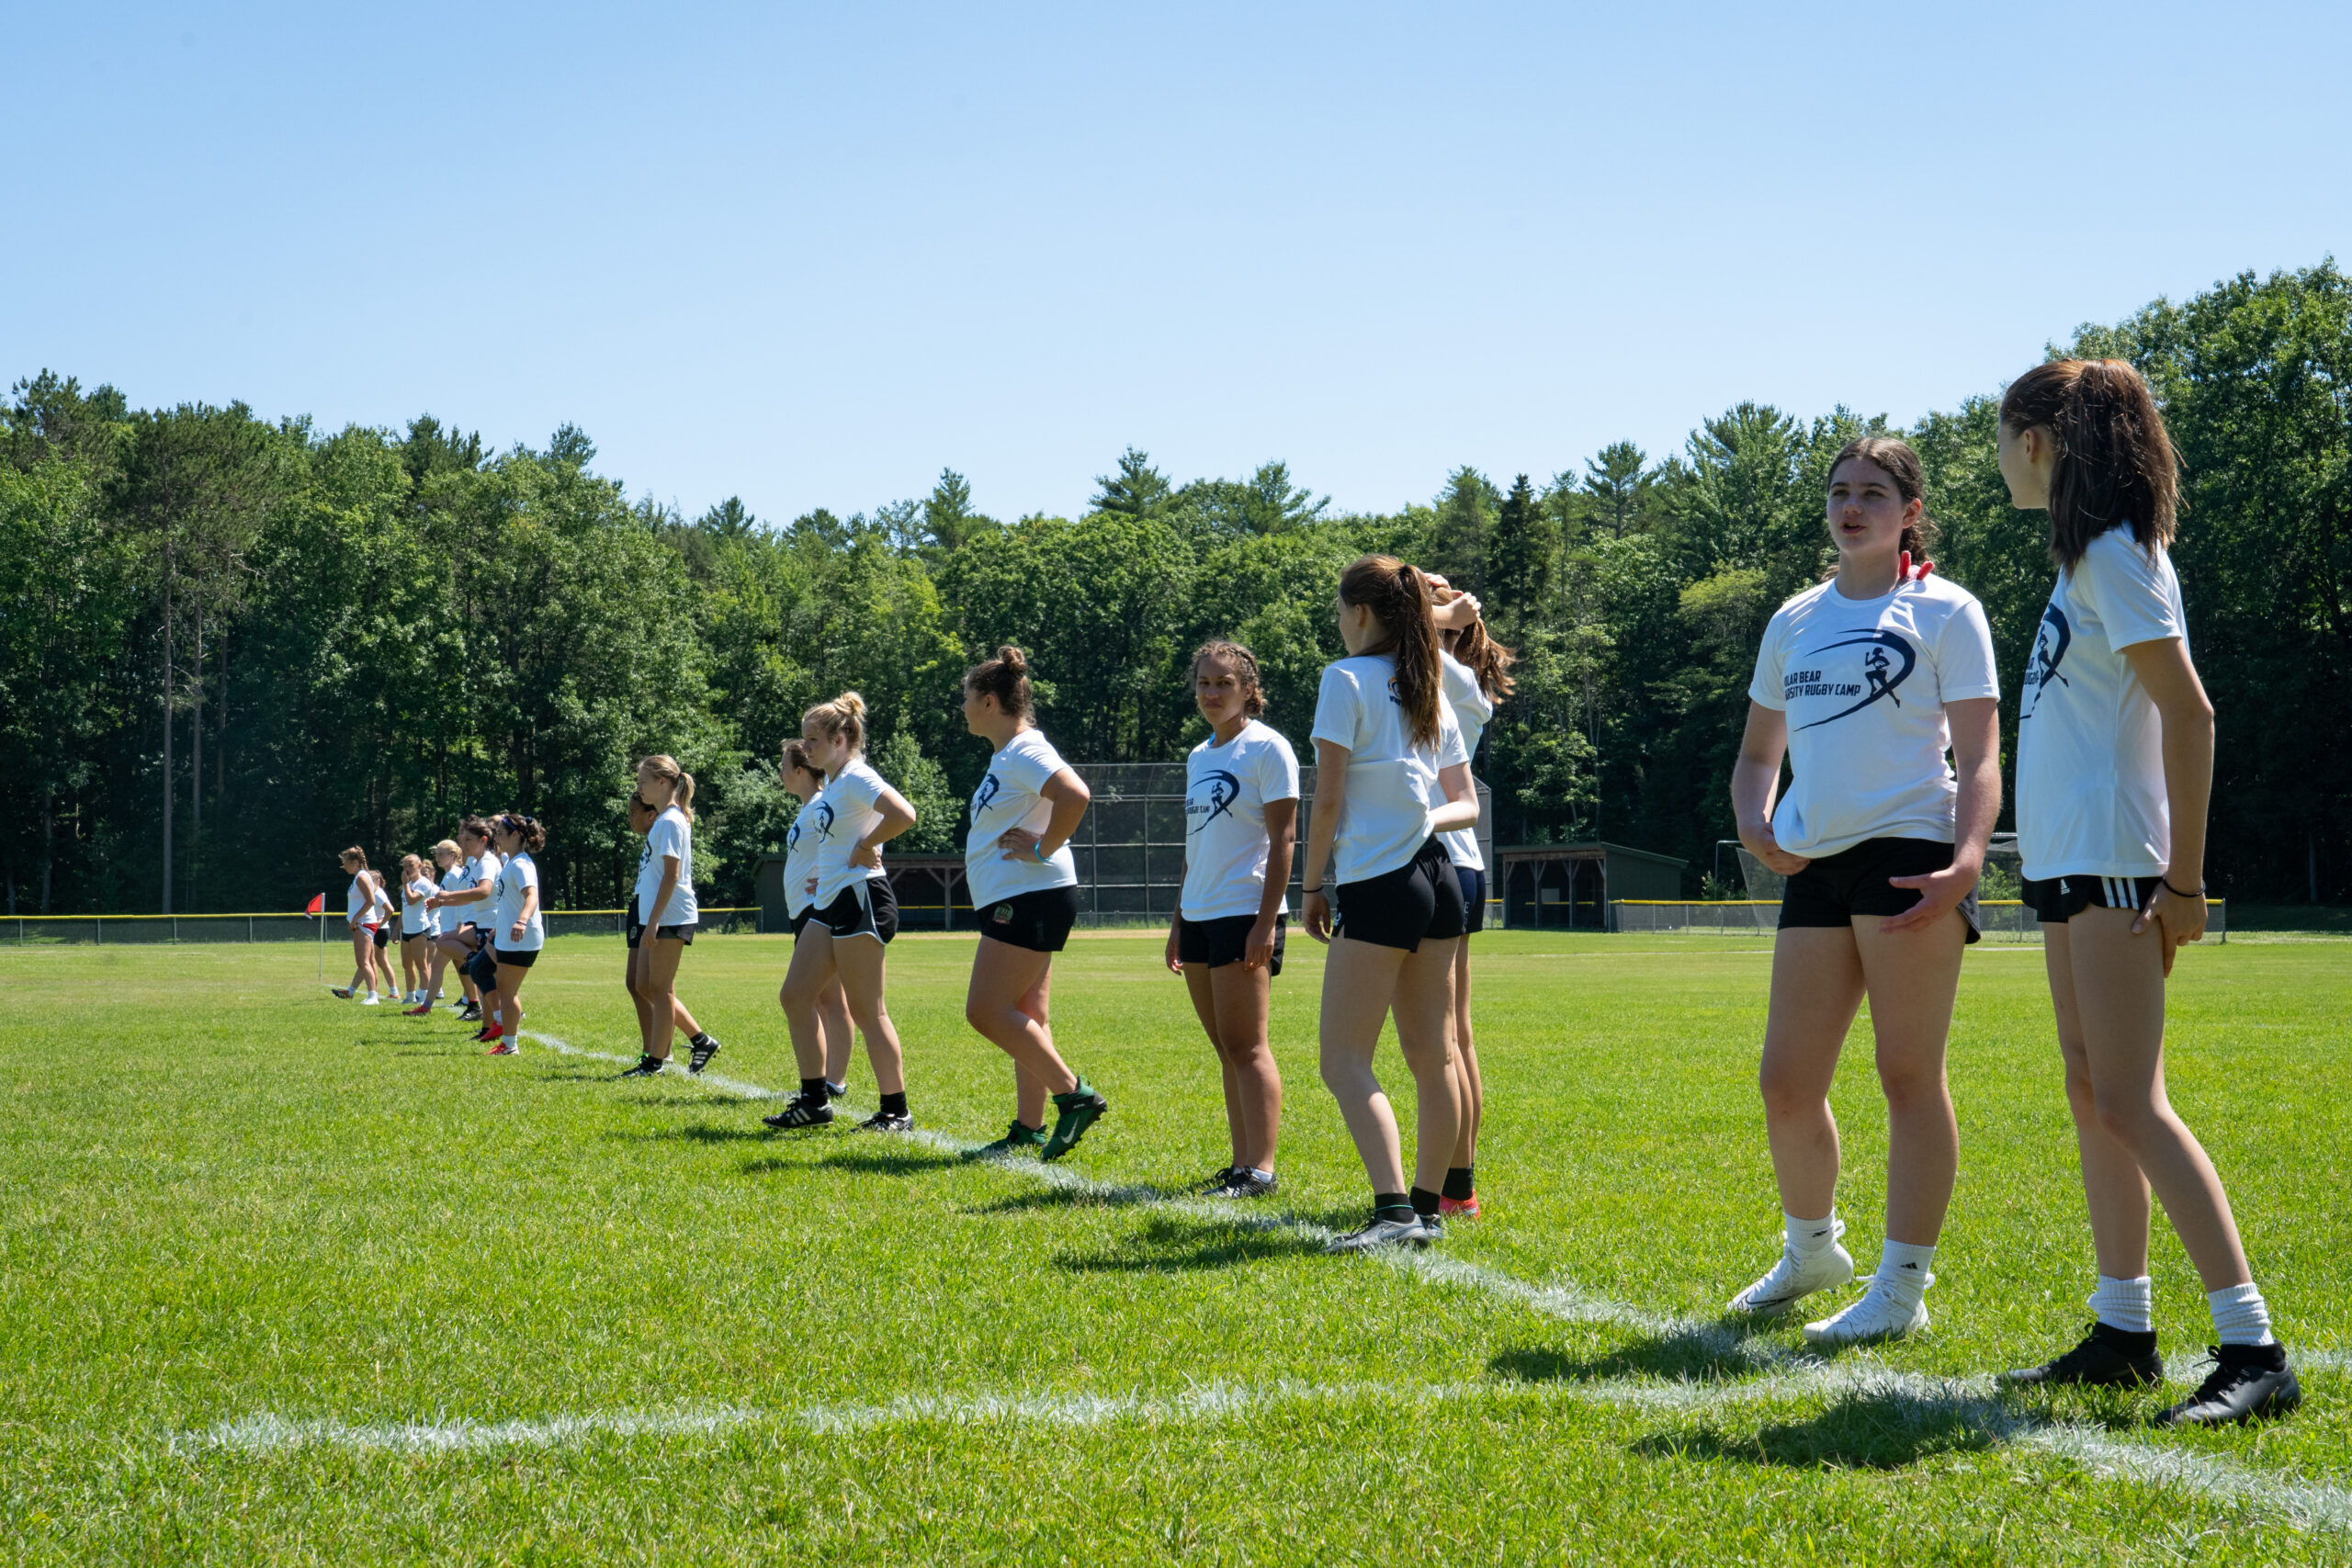 Students in a line warming up on a field